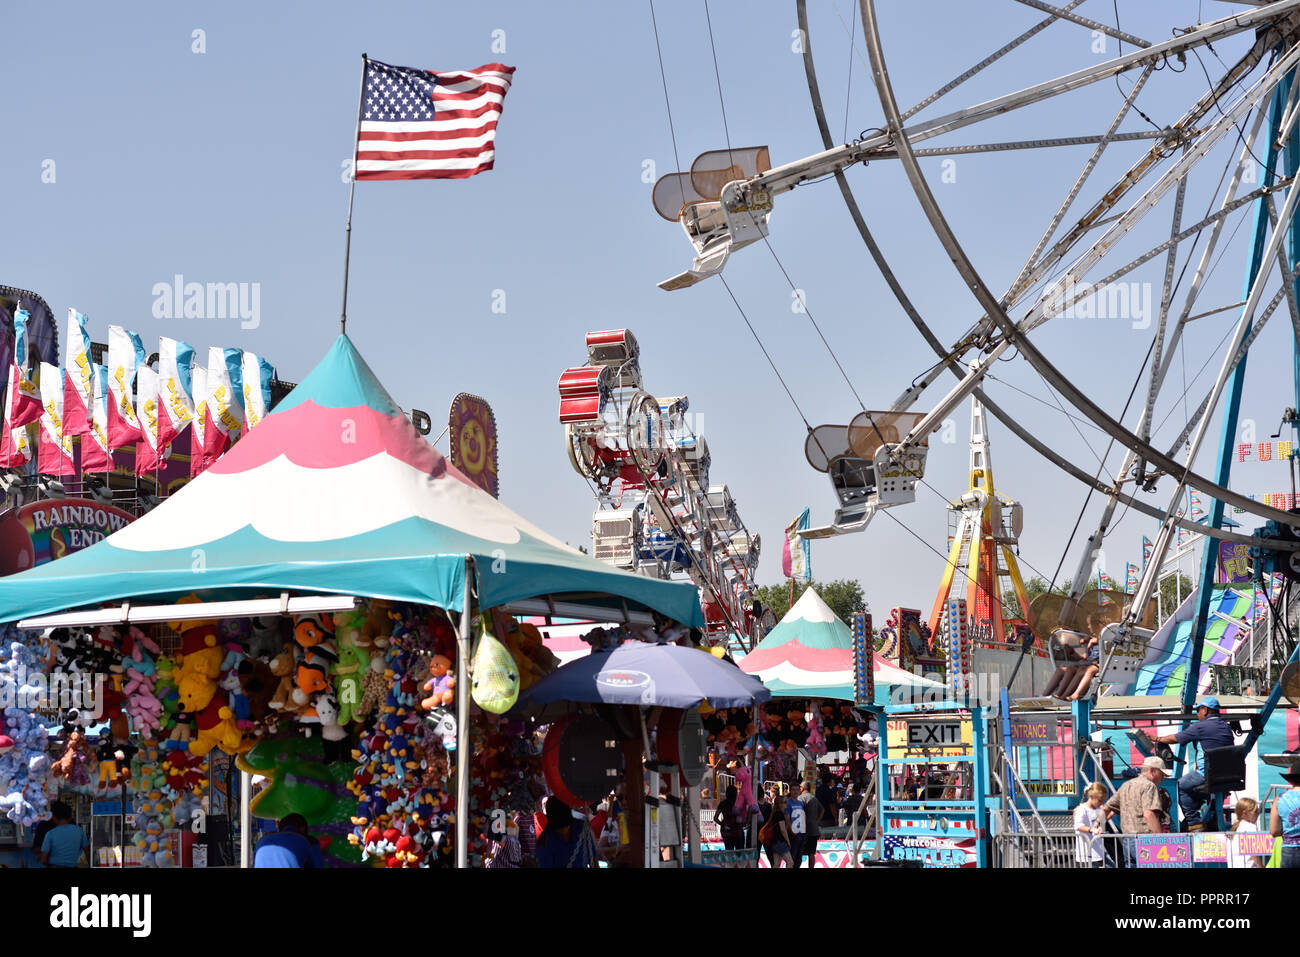 carnival scene with U.S.A. flag Stock Photo